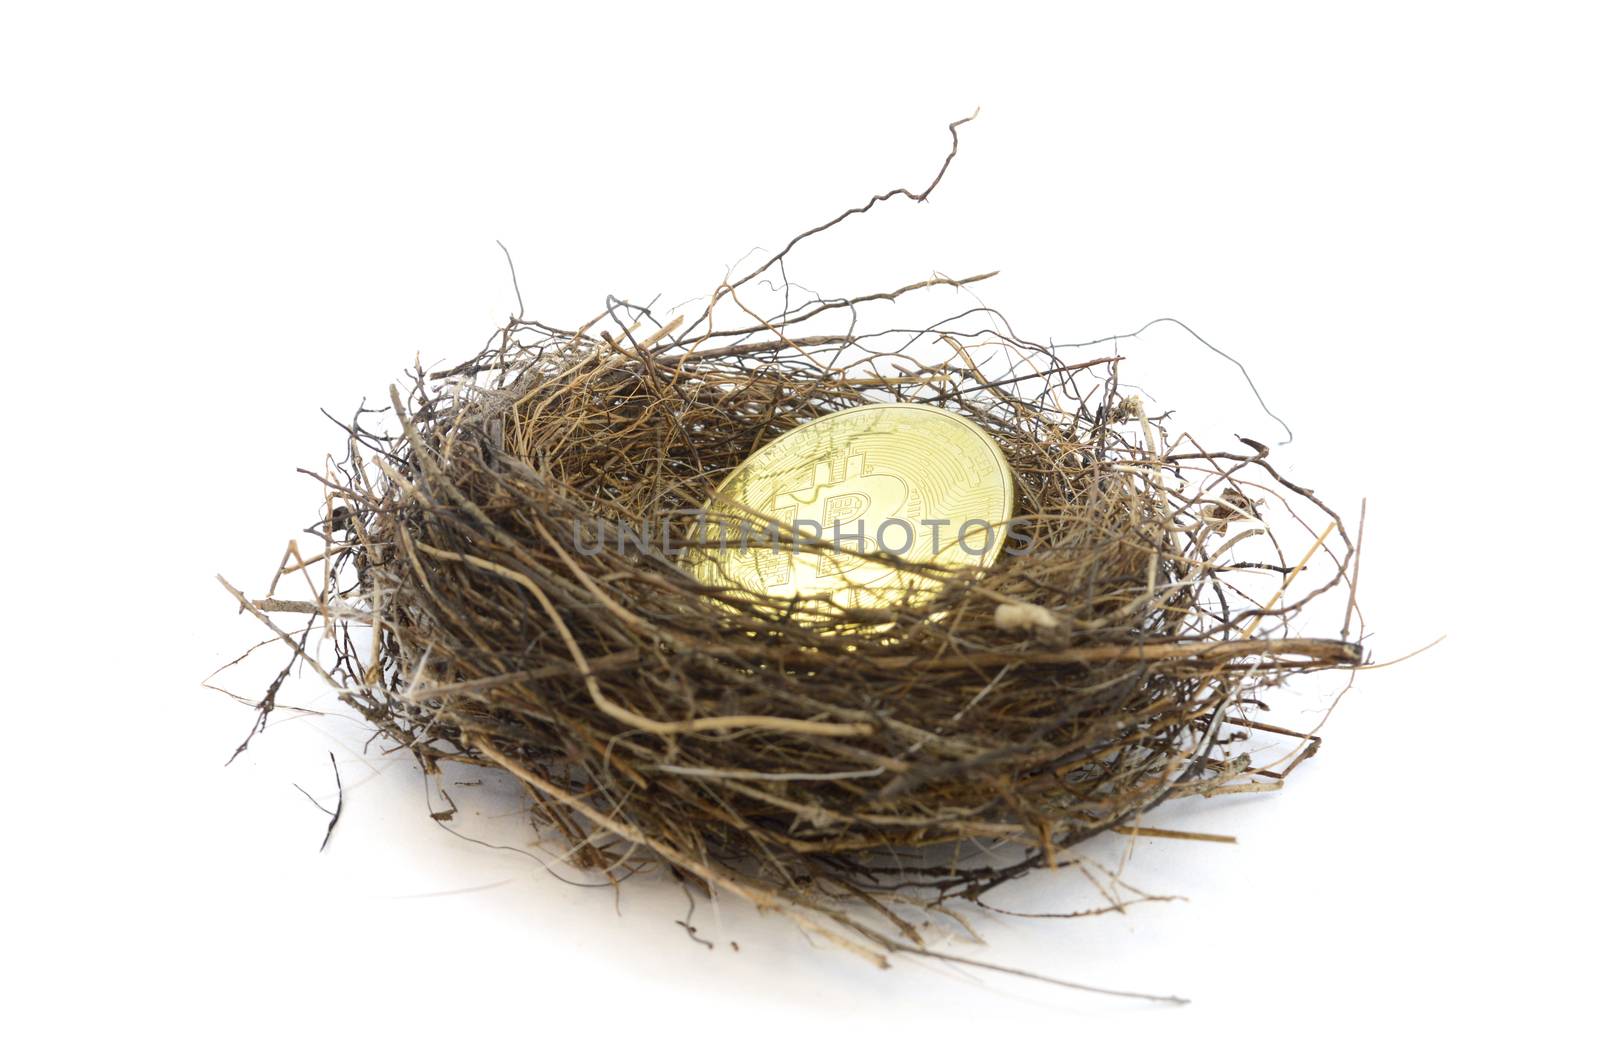 A concept based on longterm investments of the cryptocurrency Bitcoin utilizing a birds nest and golden coin over a white background.